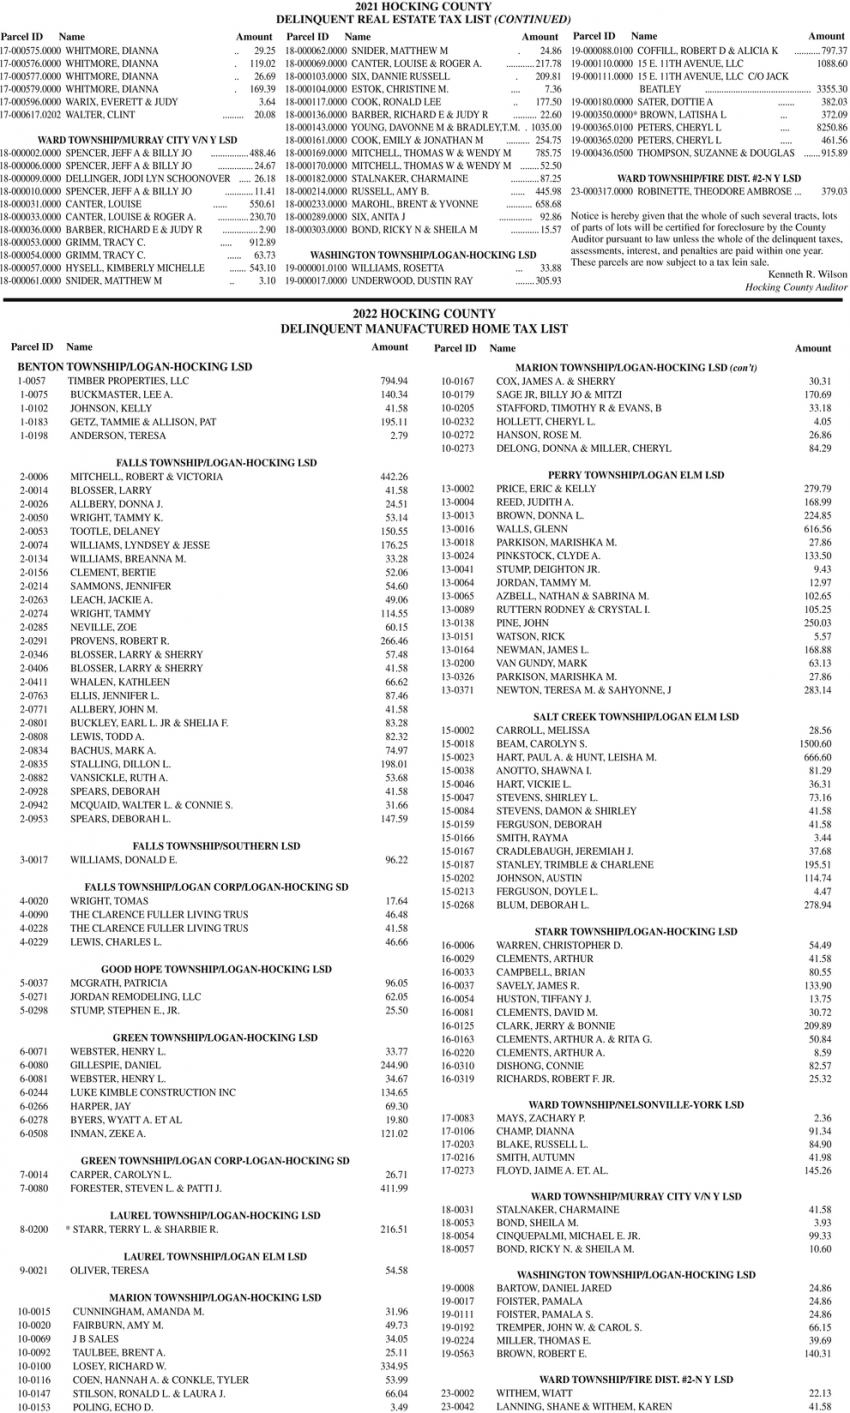 2022 Hocking County Delinquent Real Estate Tax List